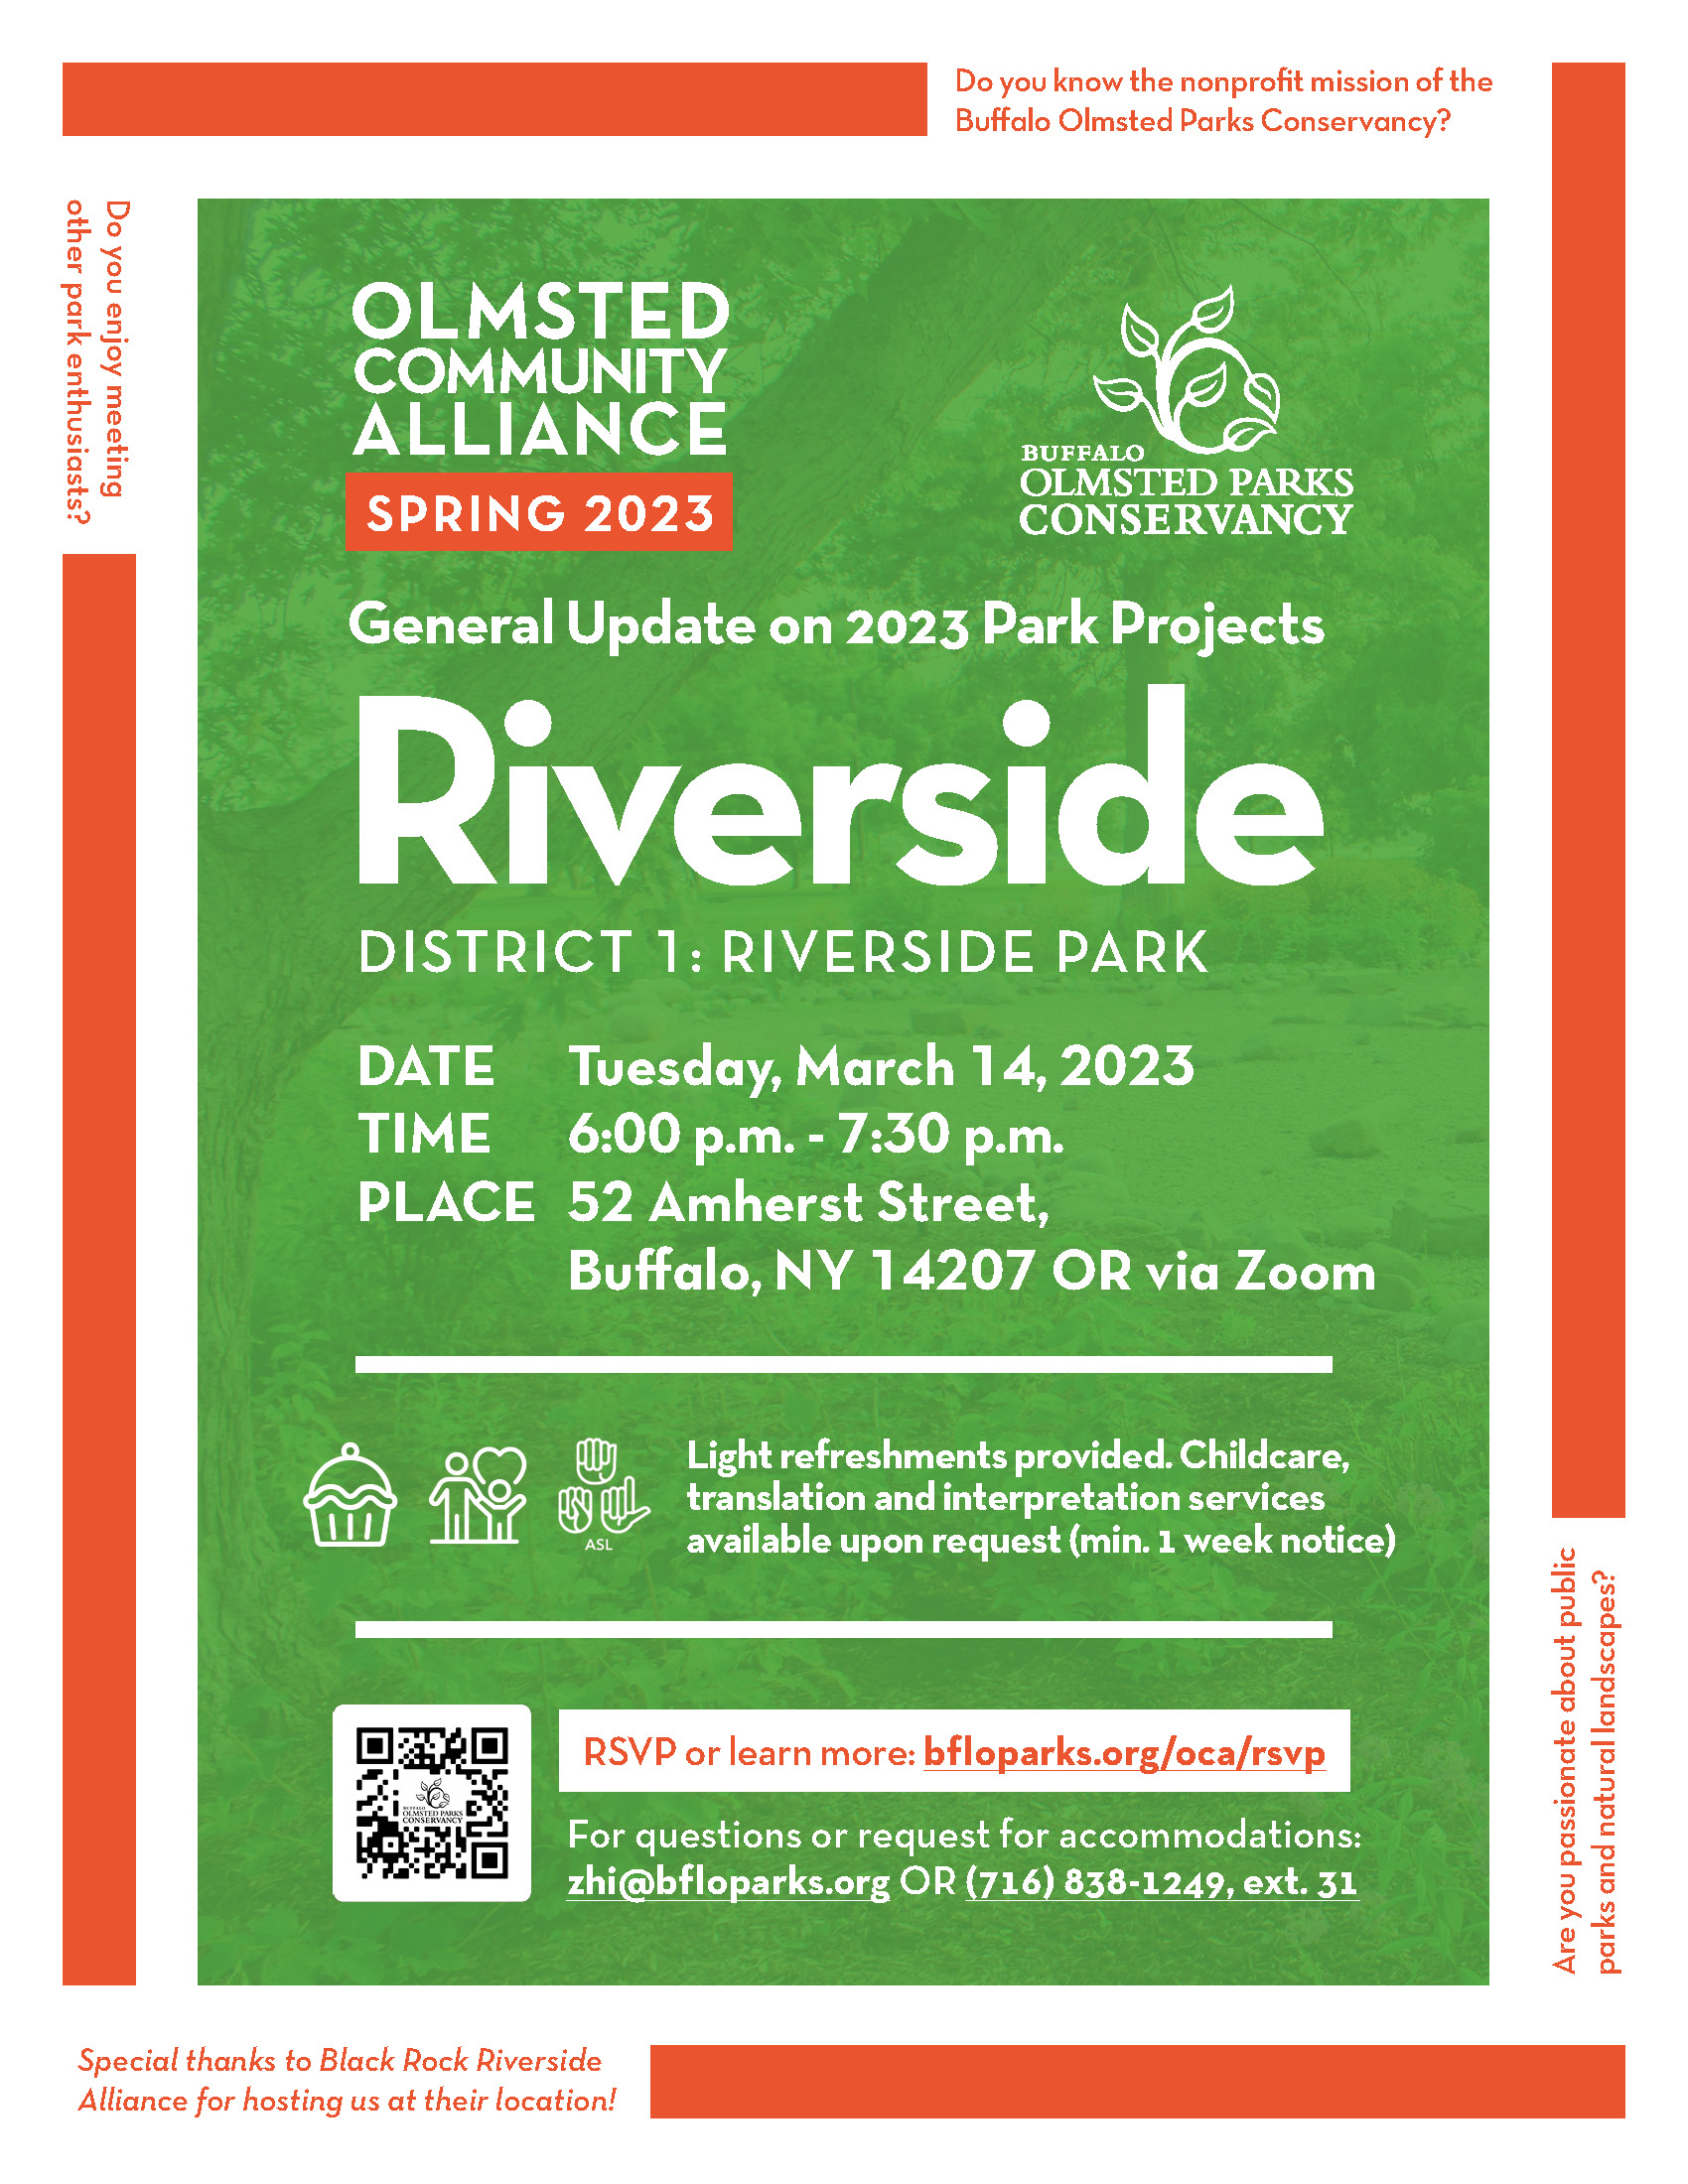 Flyer of the Riverside District Meeting on March 14, 2023